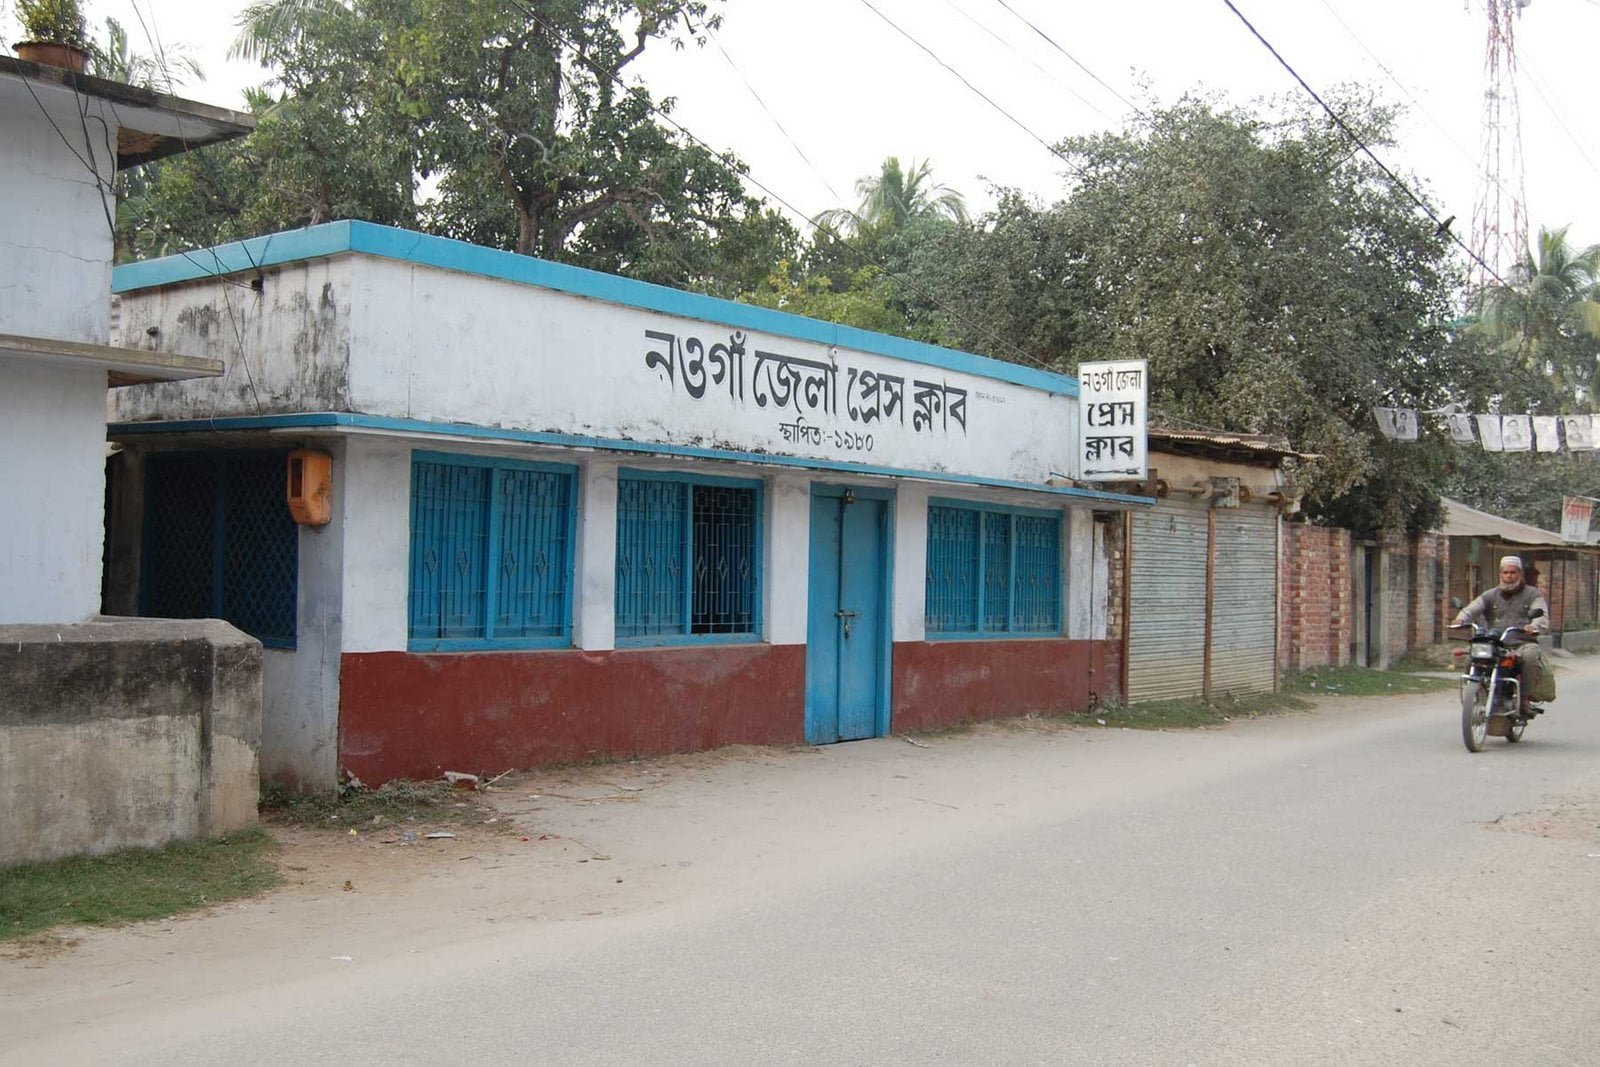 Naogaon's main organization of journalists, Naogaon District Press Club situated in Ukil Para, Naogaon. Photo taken in 2008 AD.